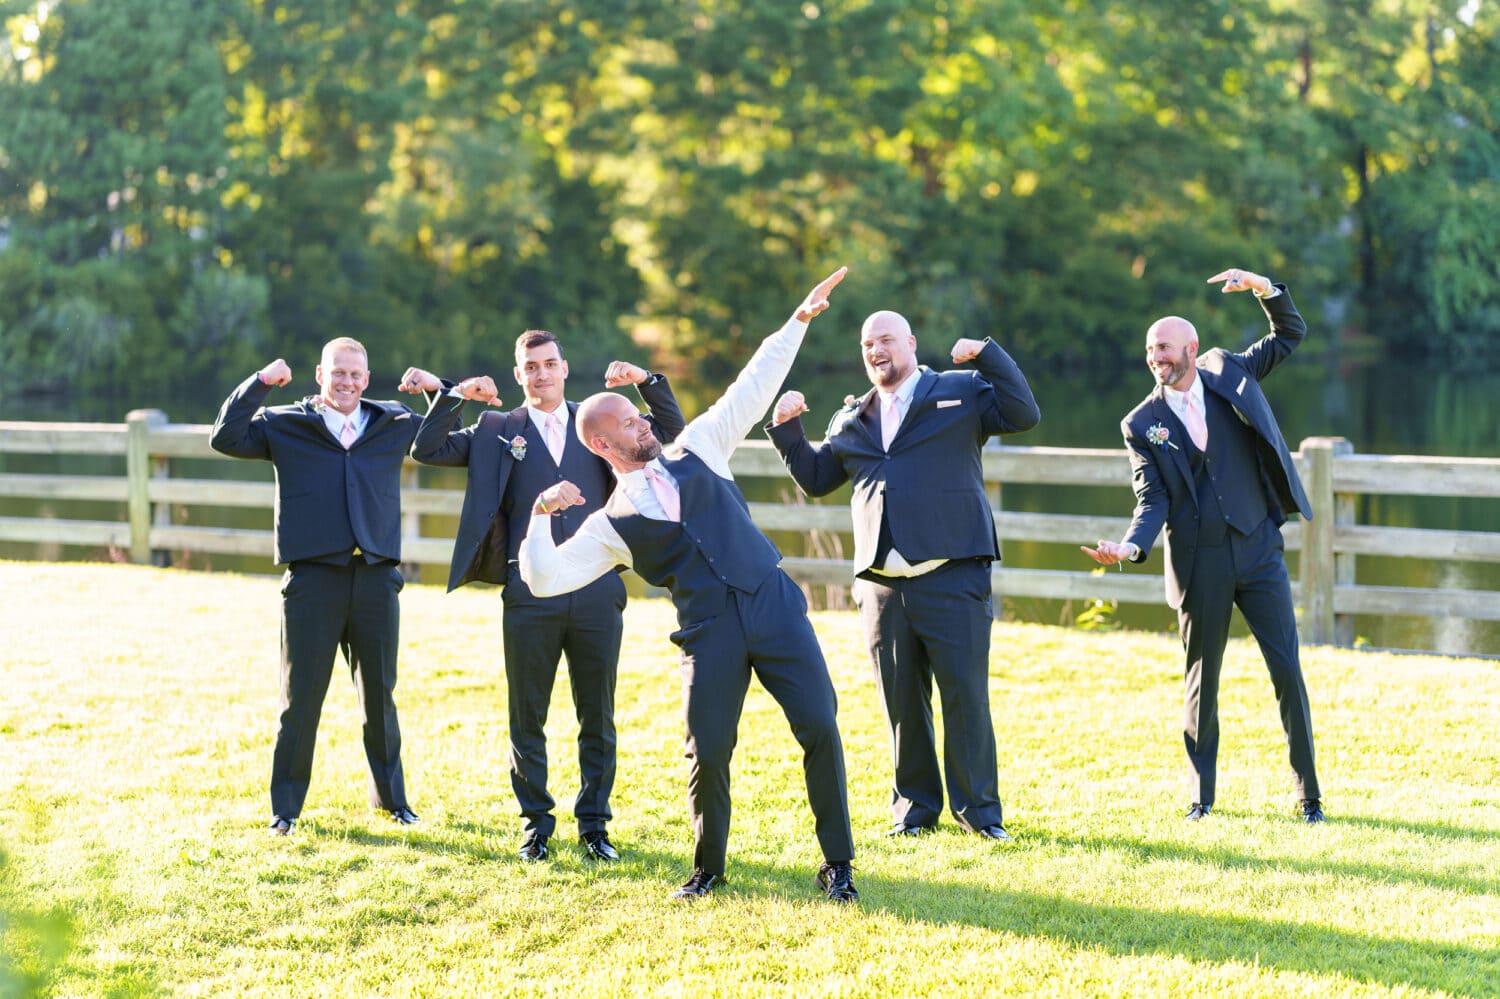 Bodybuilding groom showing off his muscles with the groomsmen - The Pavilion at Pepper Plantation